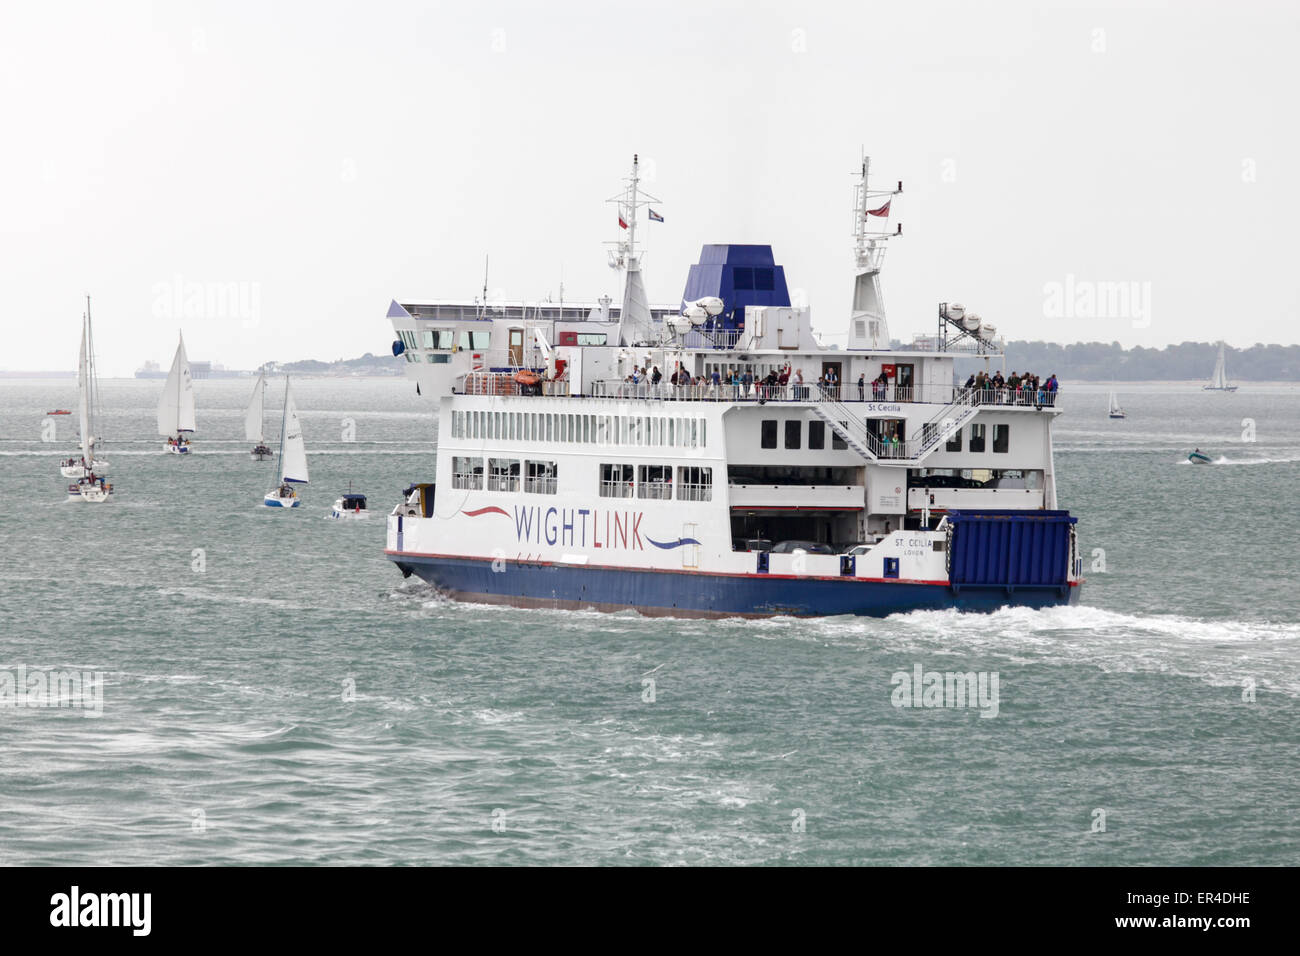 The Wightlink Isle of Wight Car Ferry 'St. Cecilia' leaving Portsmouth on its way to Fishbourne on the Isle of Wight. Stock Photo